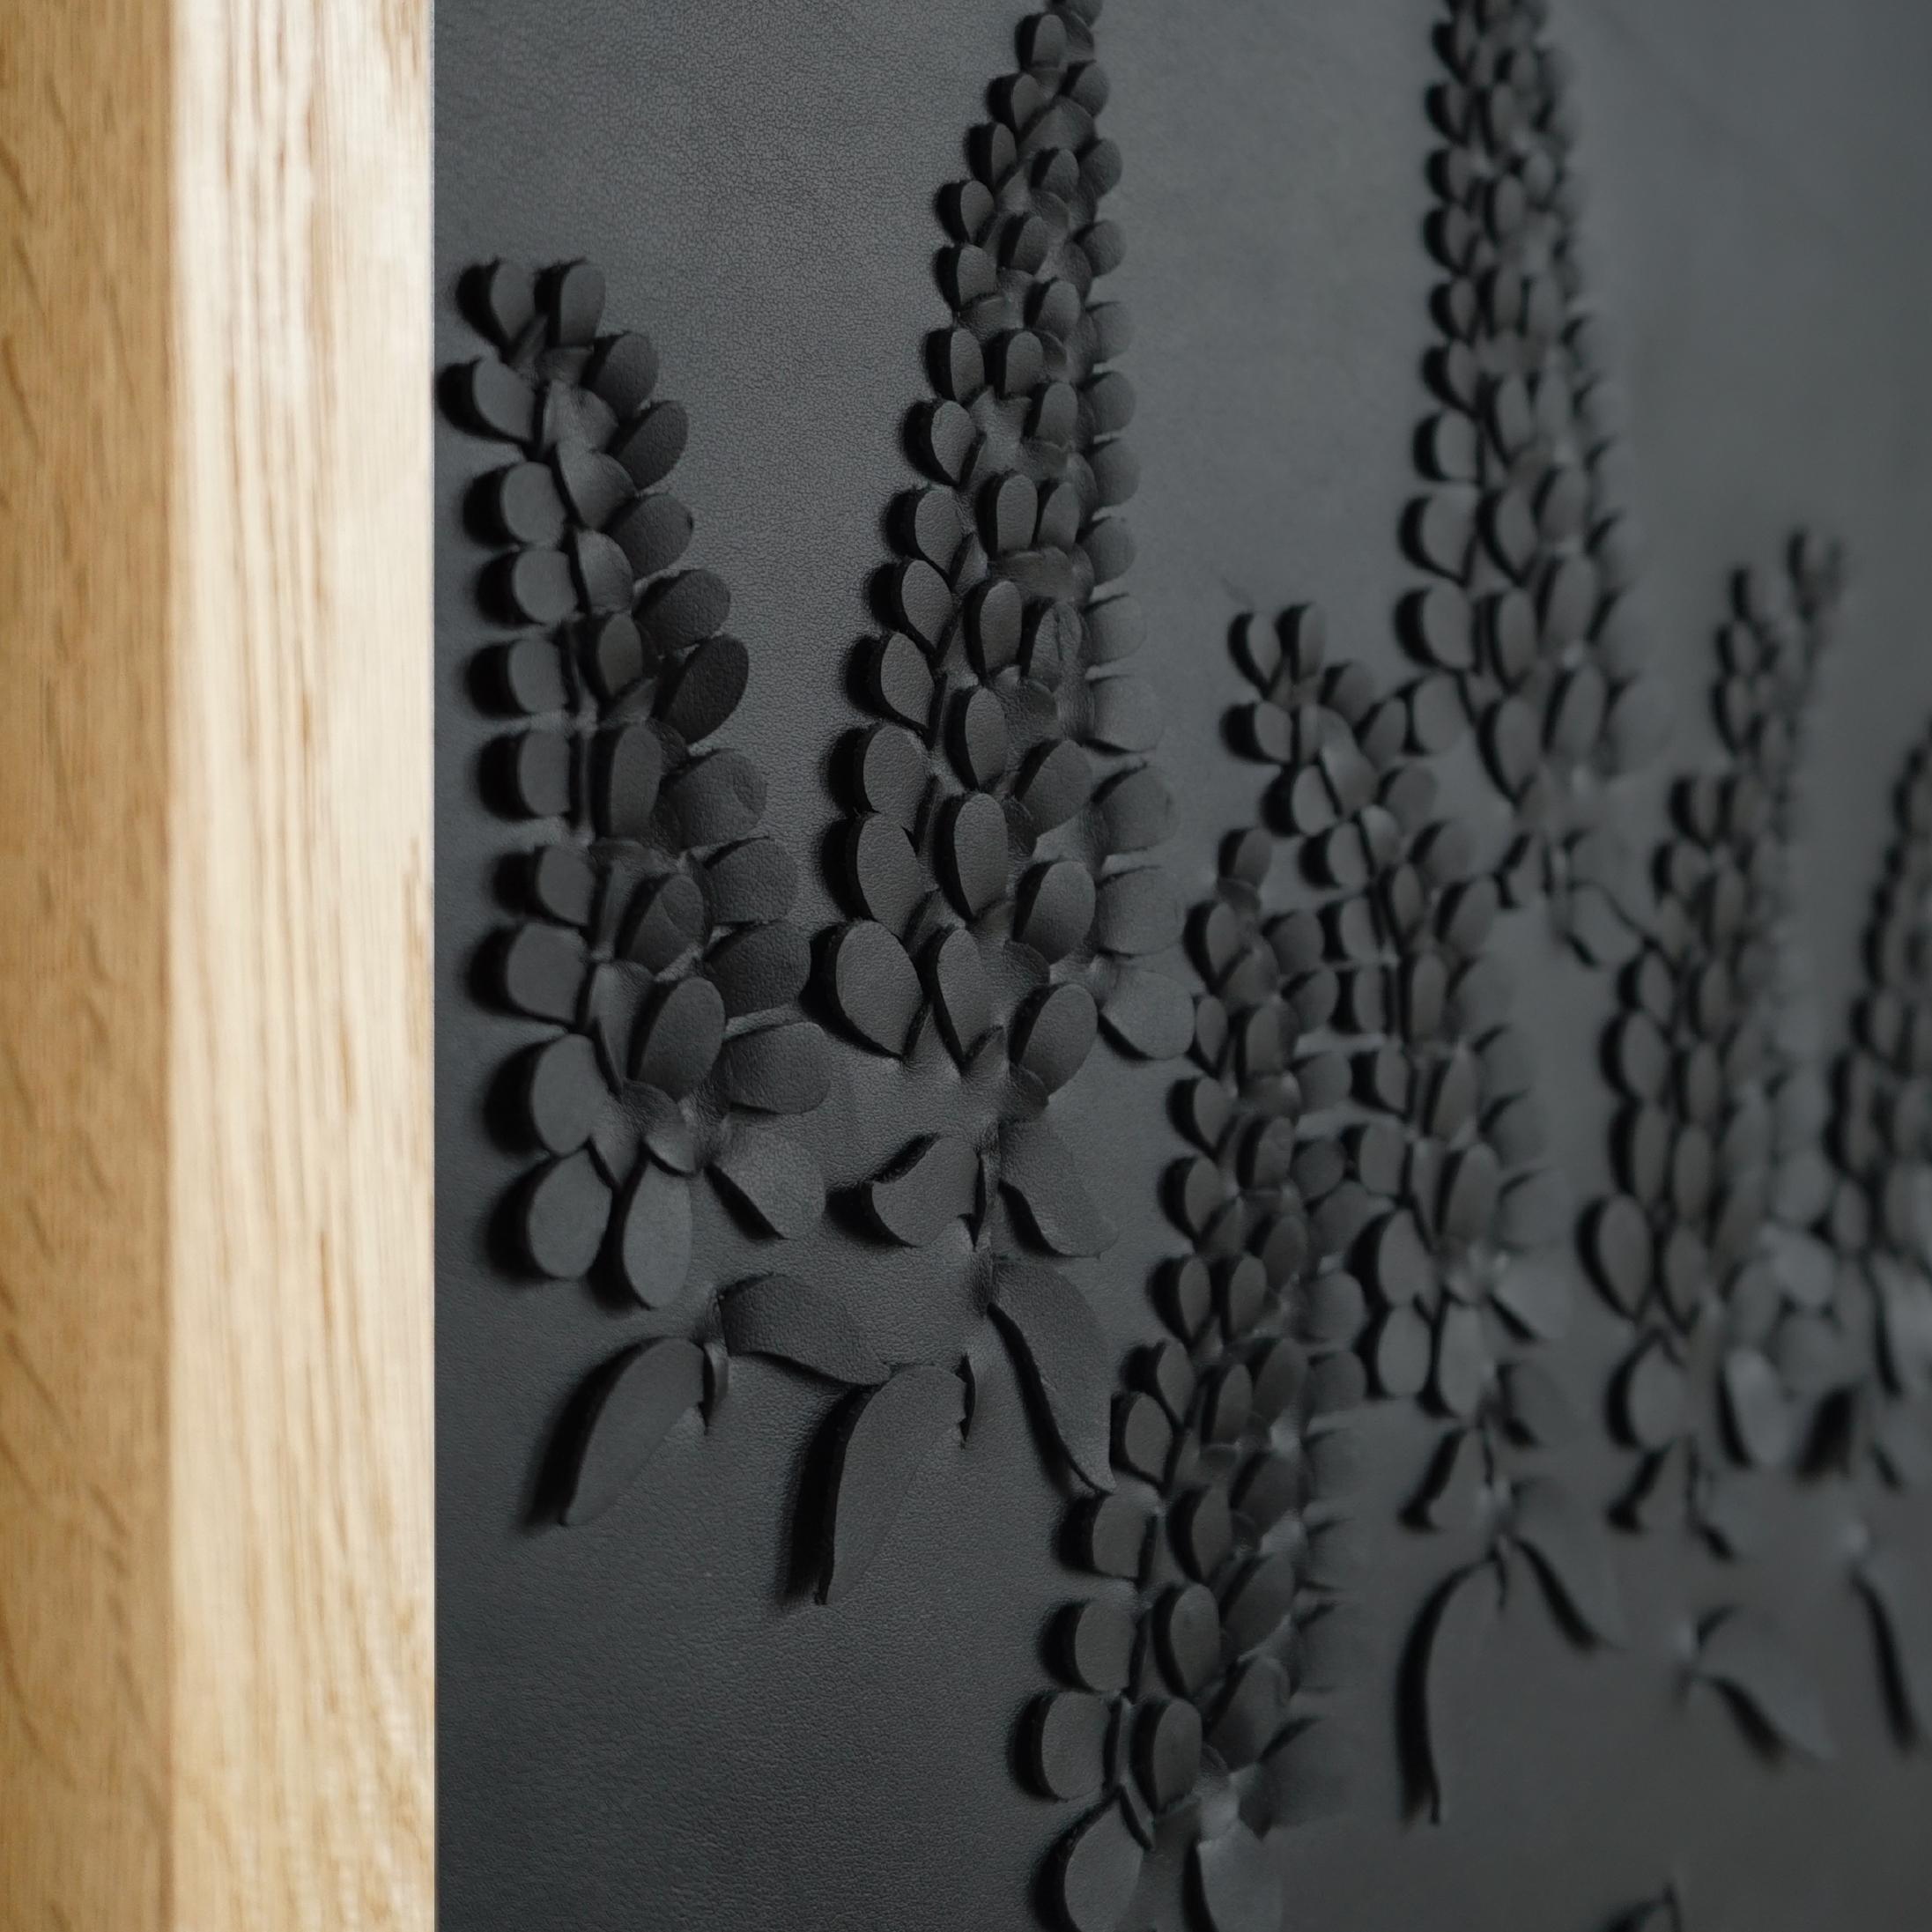 Wisteria:

A piece of 3D sculptural wall art designed and made from two layers of black leather woven together by Louise Heighes.
Measurements are 17 x 17 inches or 43 x 43 cm

This piece is inspired by the lovely change in scale that occurs in a